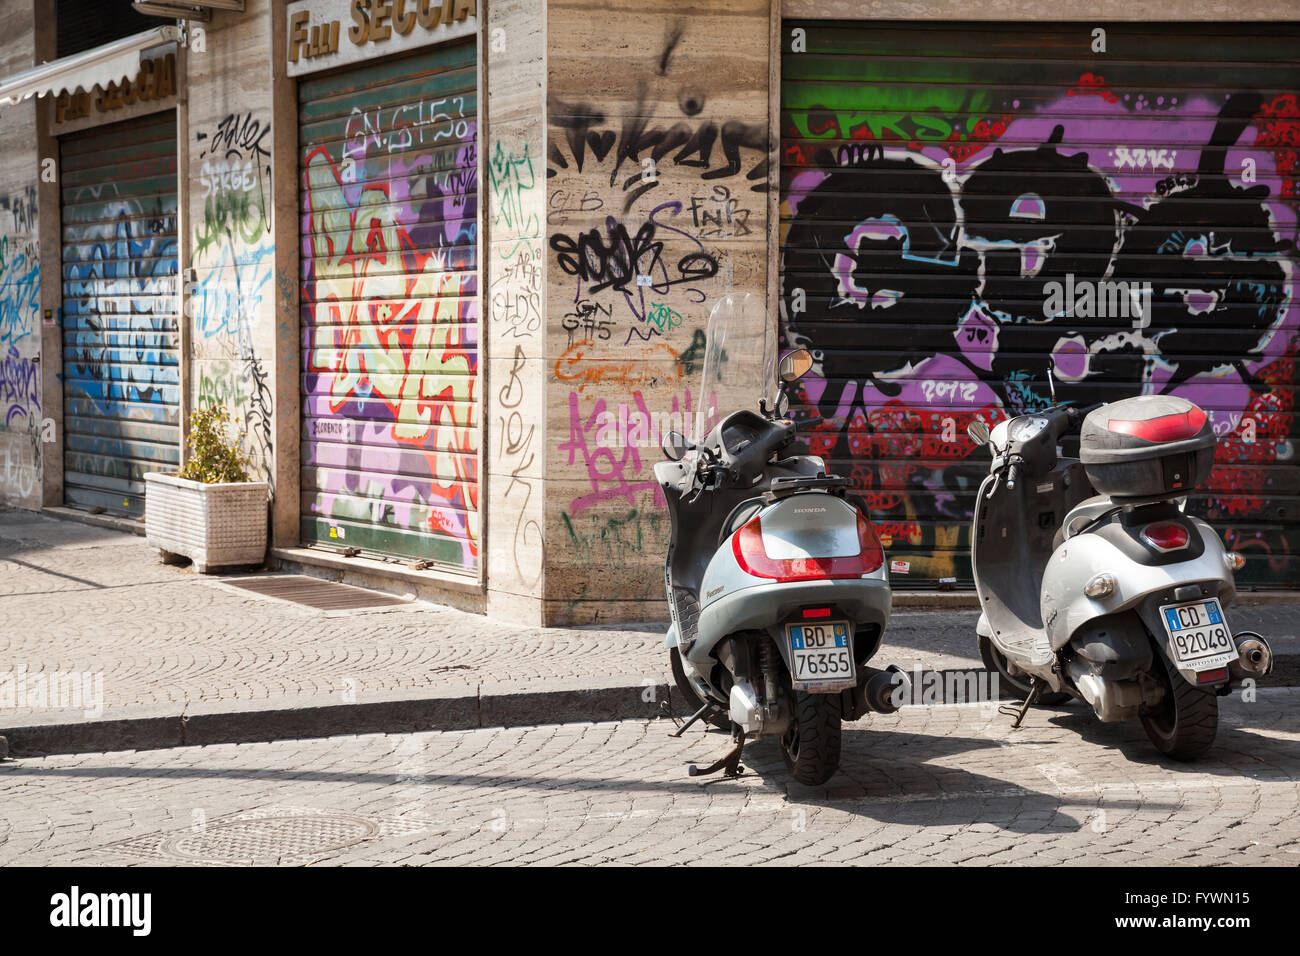 Naples, Italy - August 9, 2015: Two scooters parked on a roadside in Naples Stock Photo